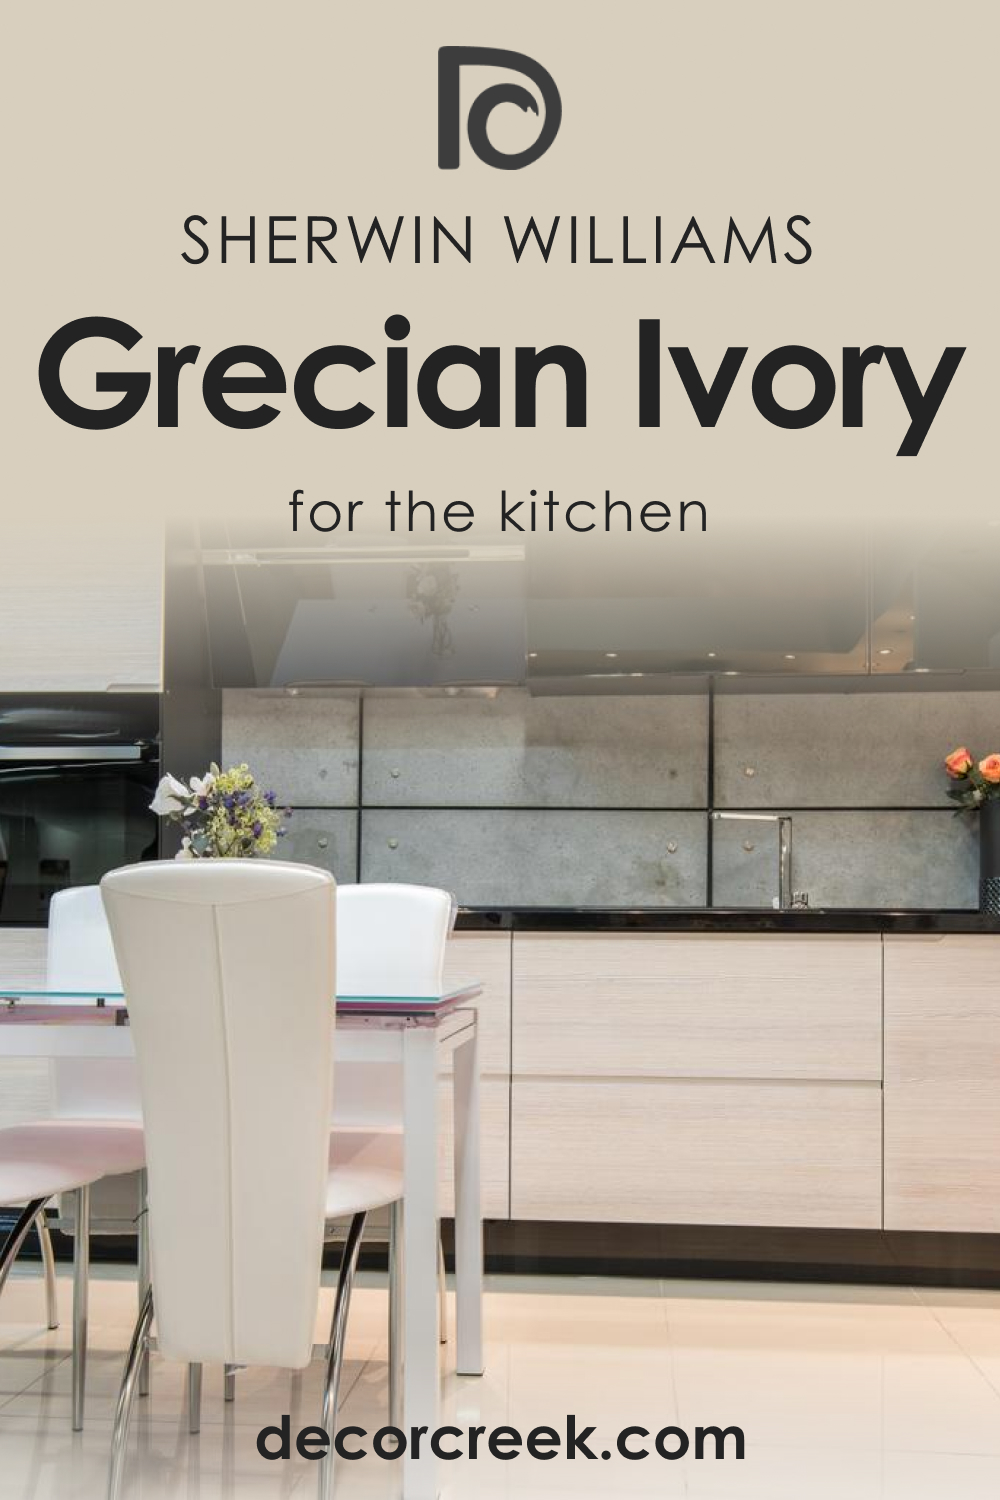 How to Use SW 7541 Grecian Ivory for the Kitchen?